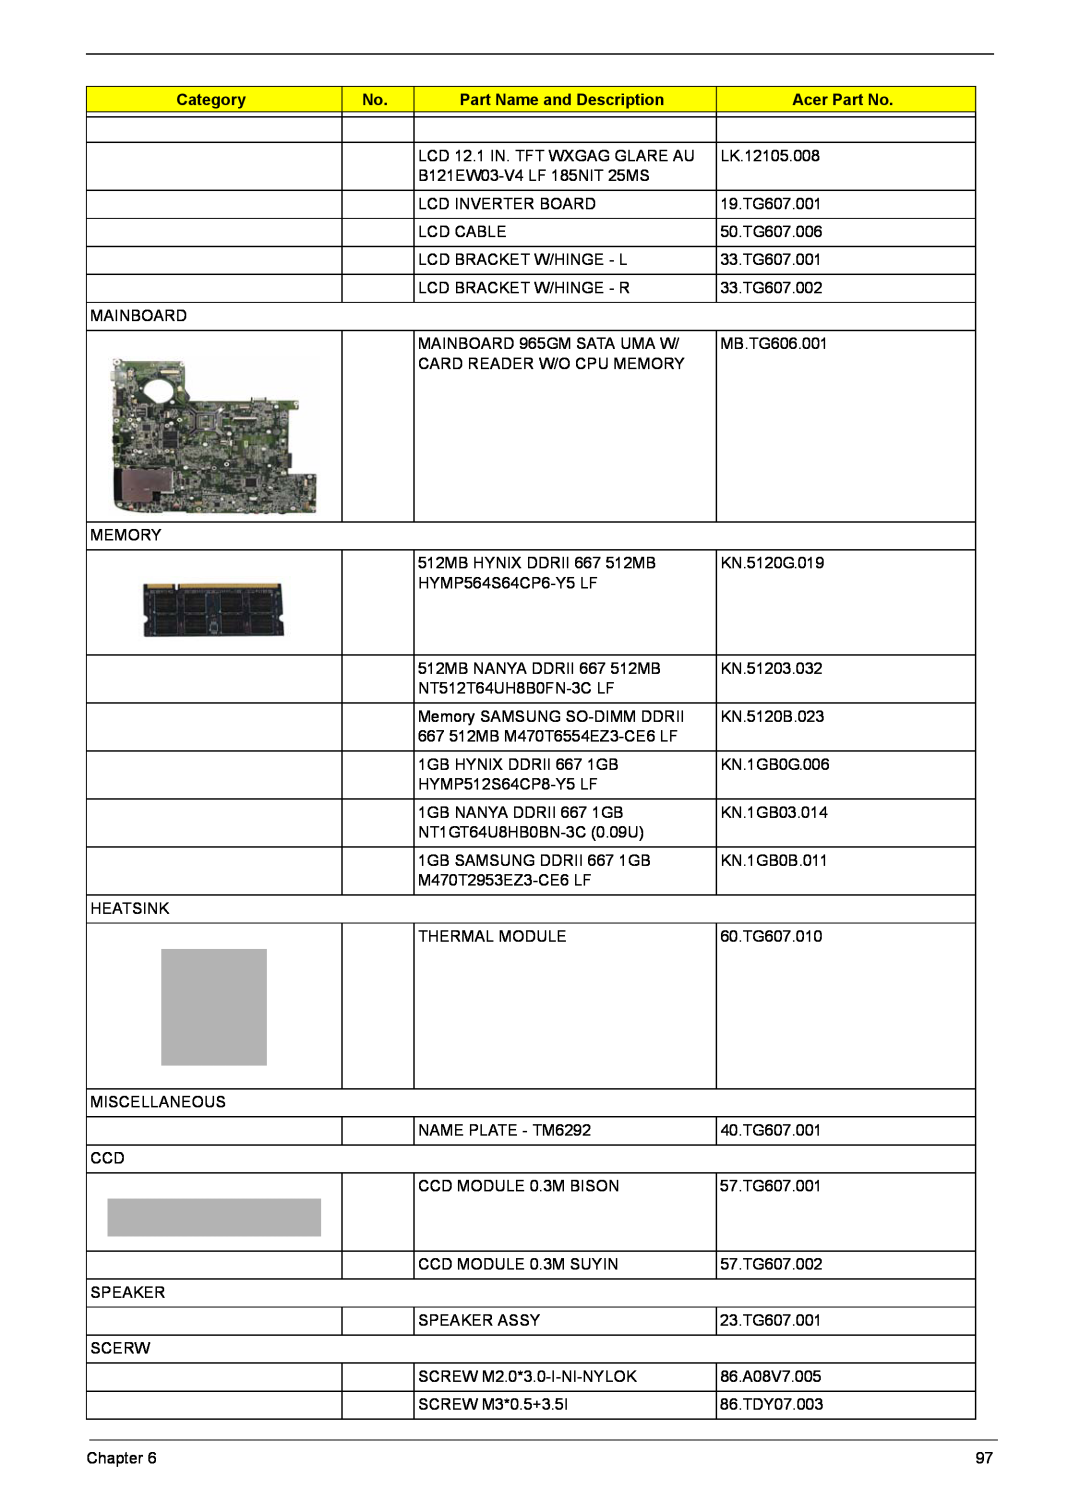 Acer 5920G Series manual Category, Part Name and Description, Acer Part No 